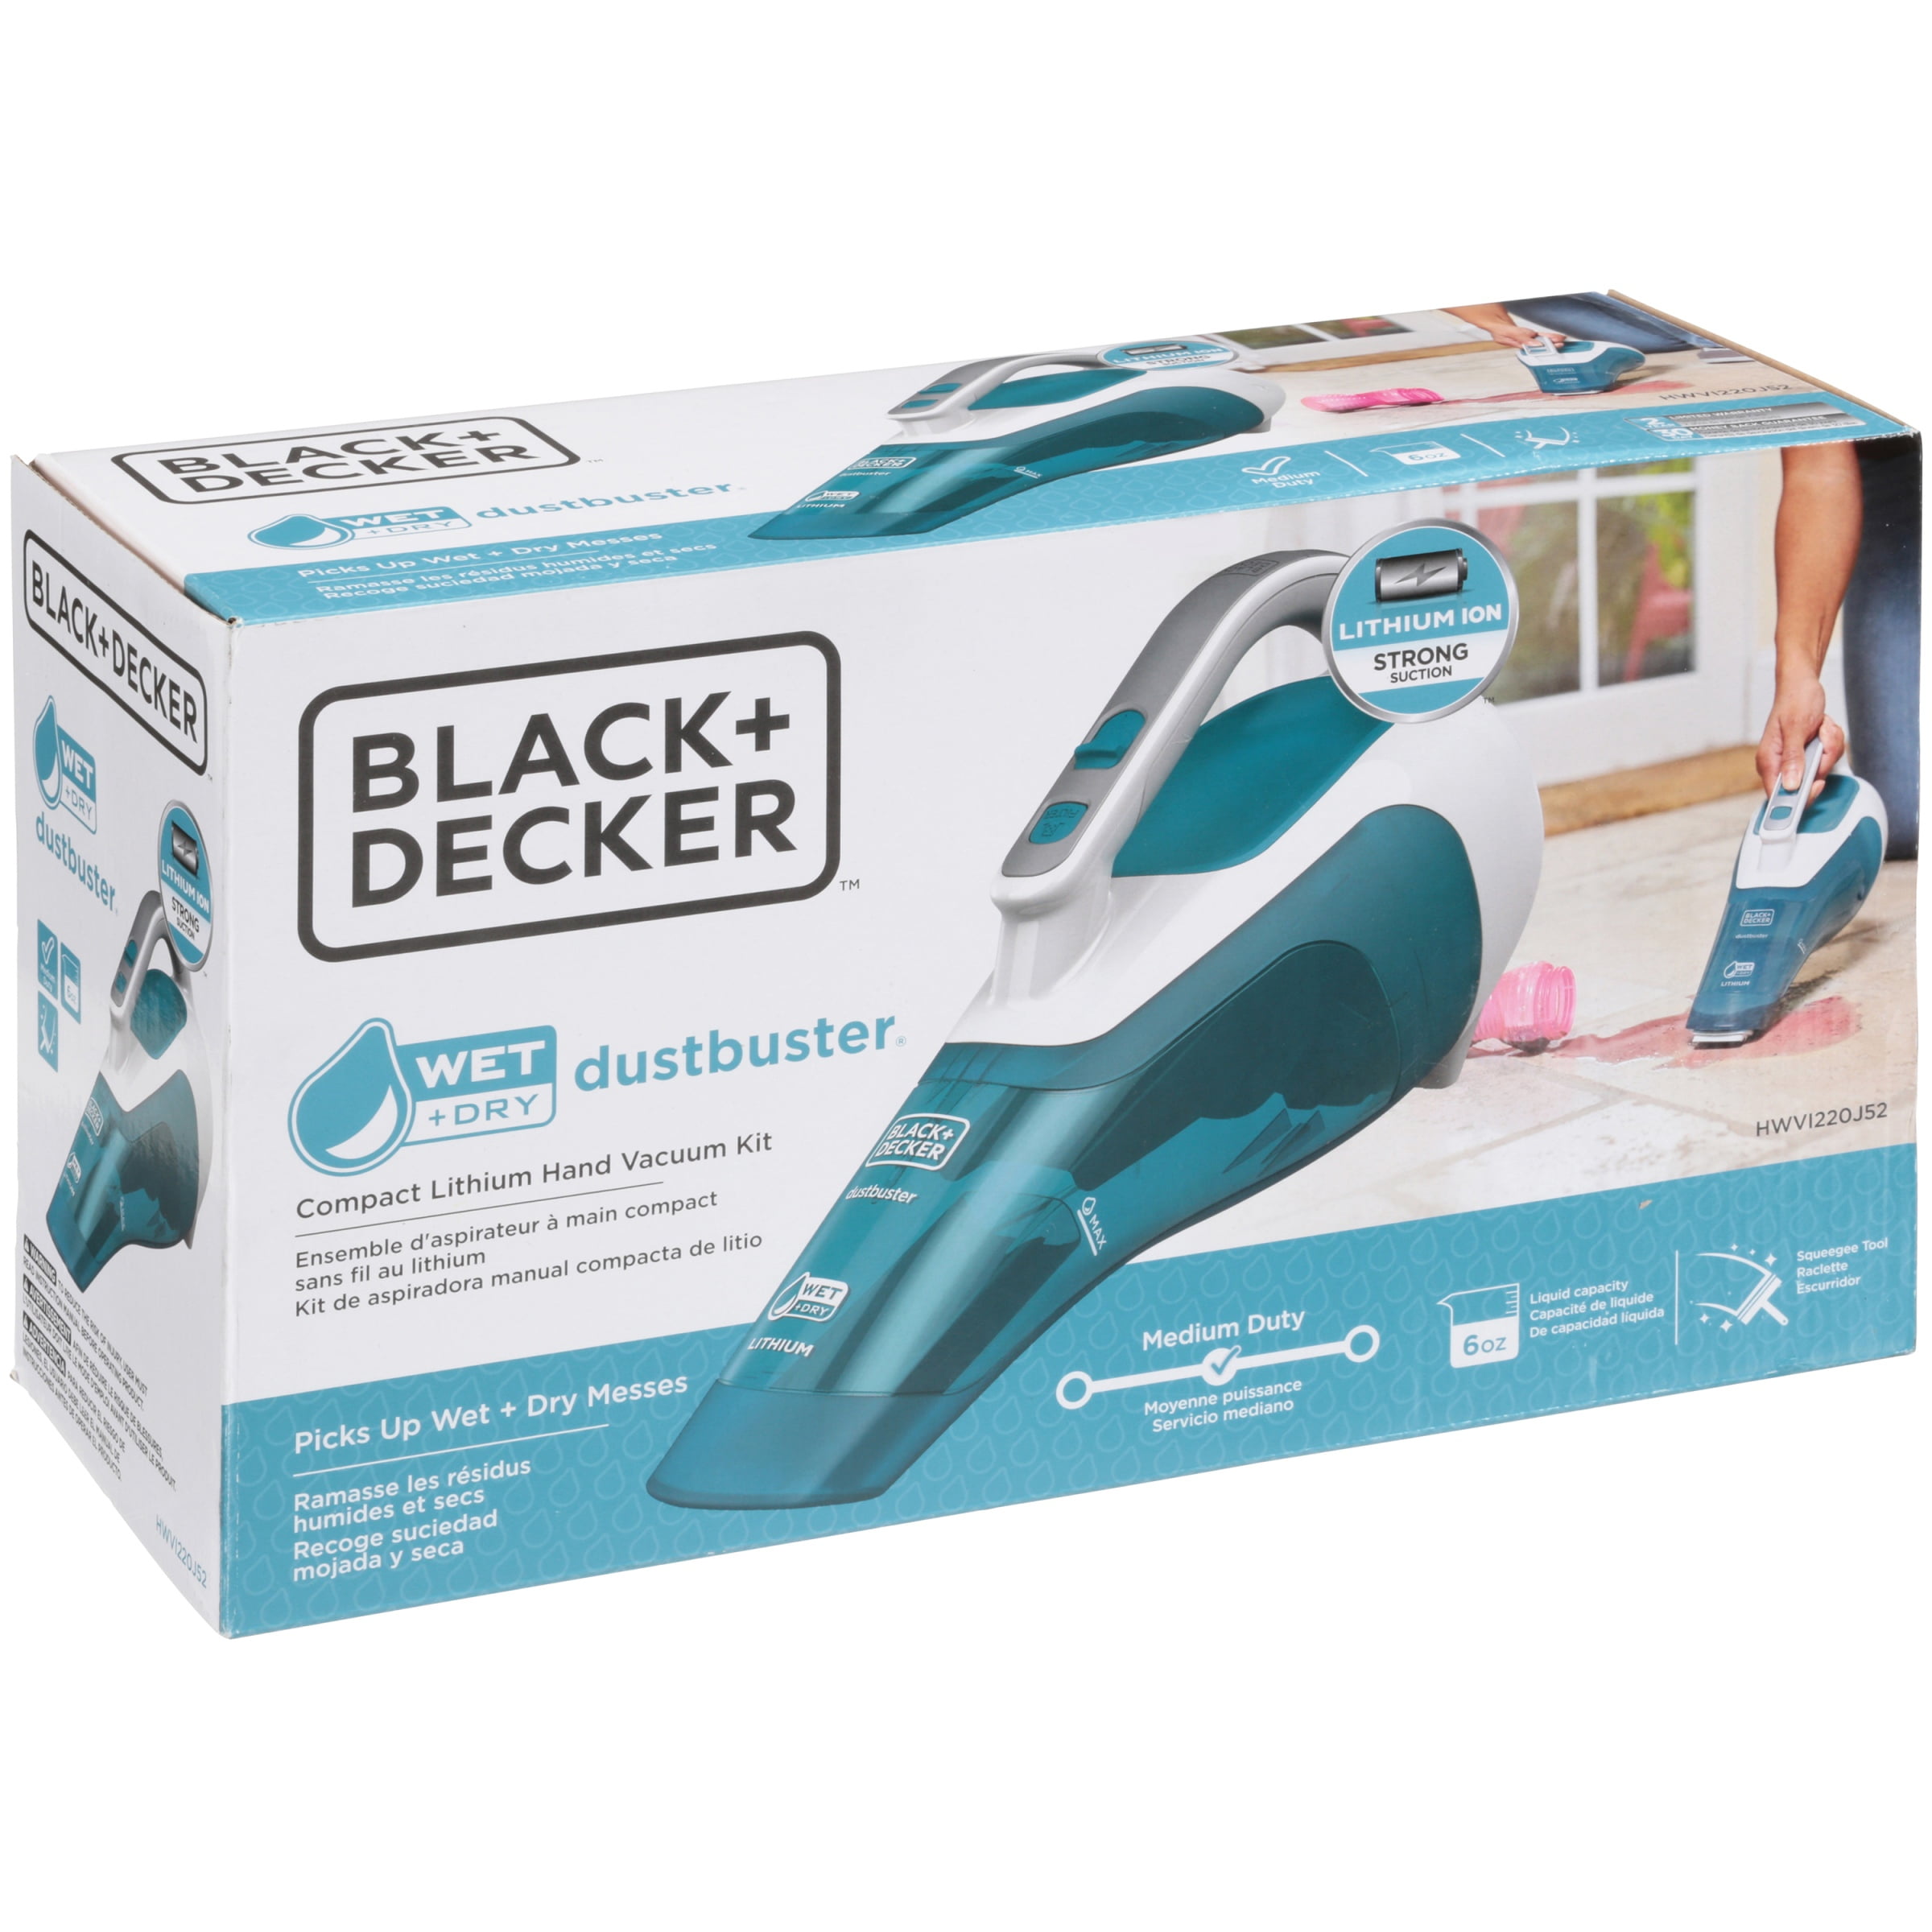 Black and decker cv9605 cordless dust buster for 220 volt